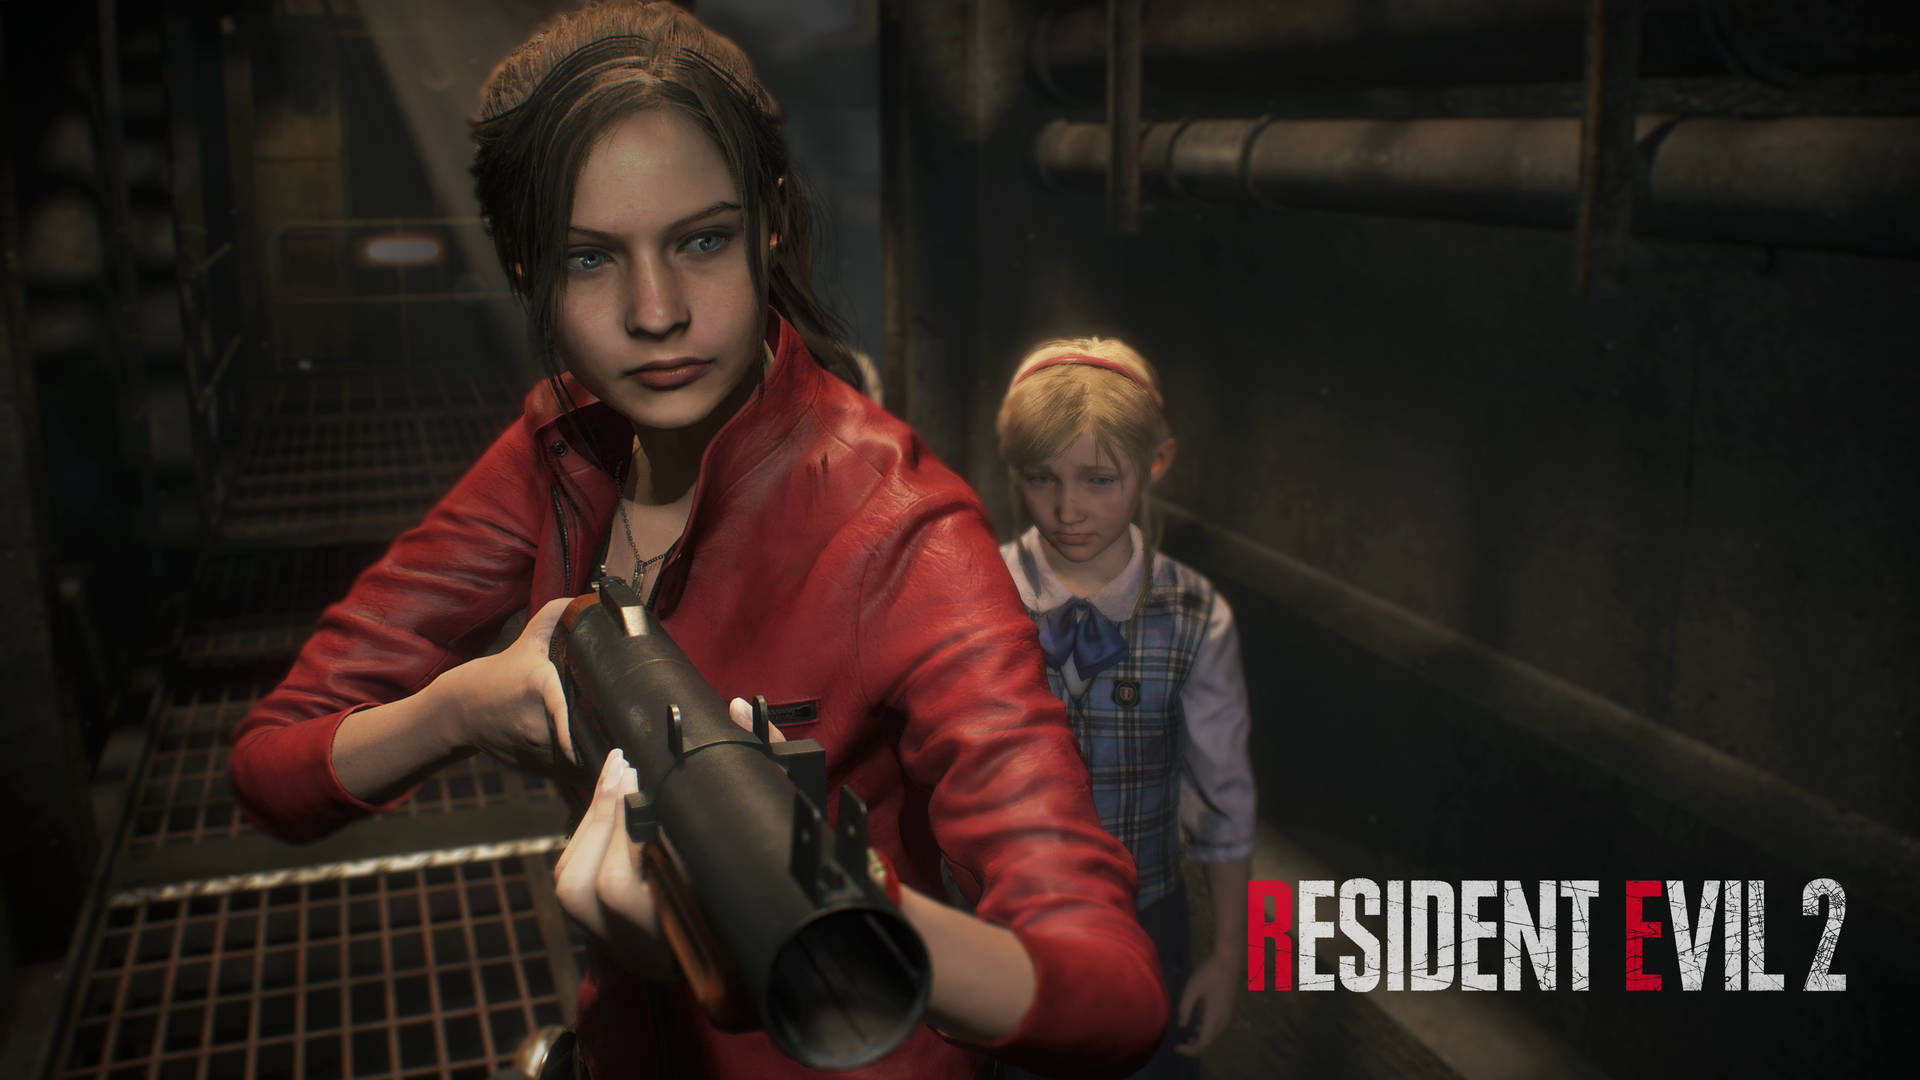 "Claire and Sherry Take On the Zombies in Resident Evil 2 Remake" Wallpaper